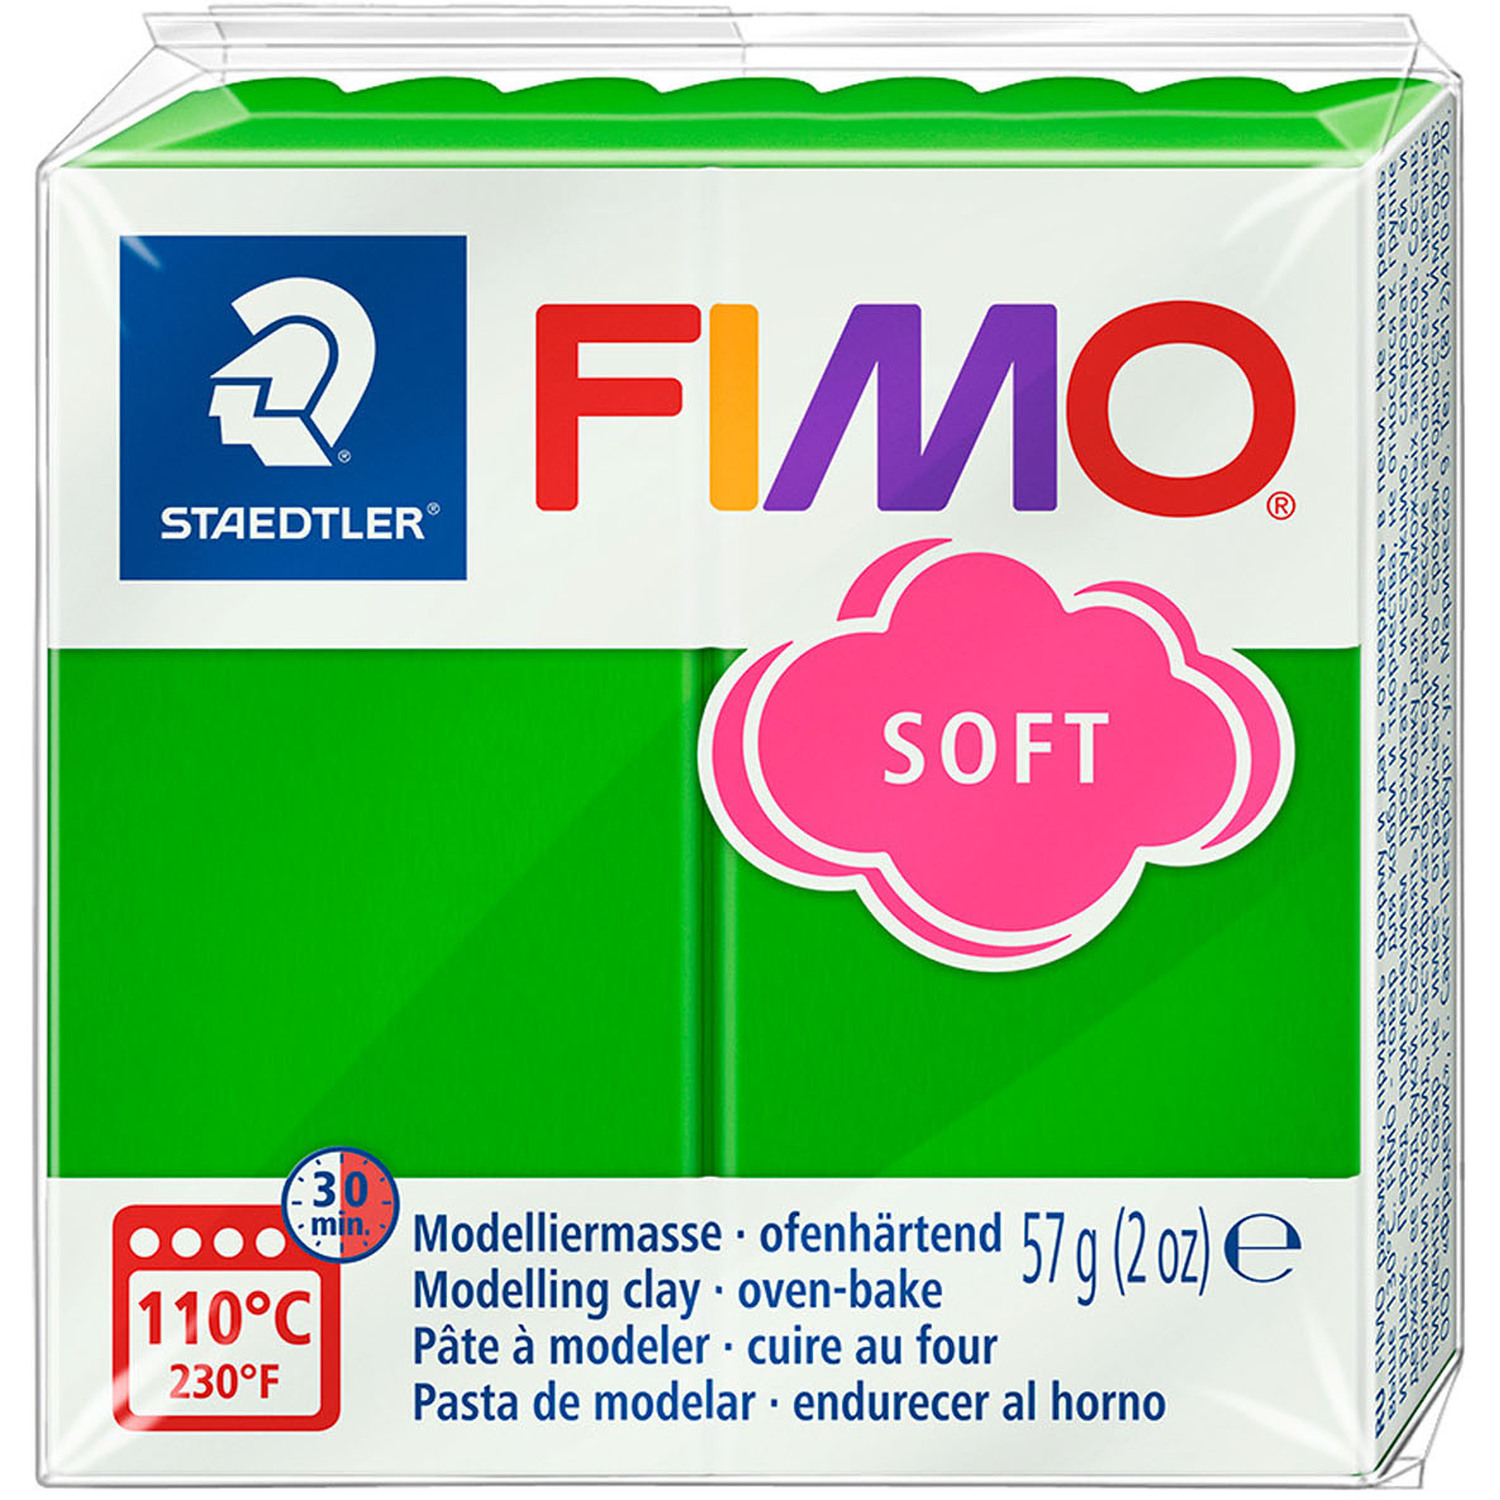 Staedtler FIMO Soft Modelling Clay Block - Tropical Green Image 1